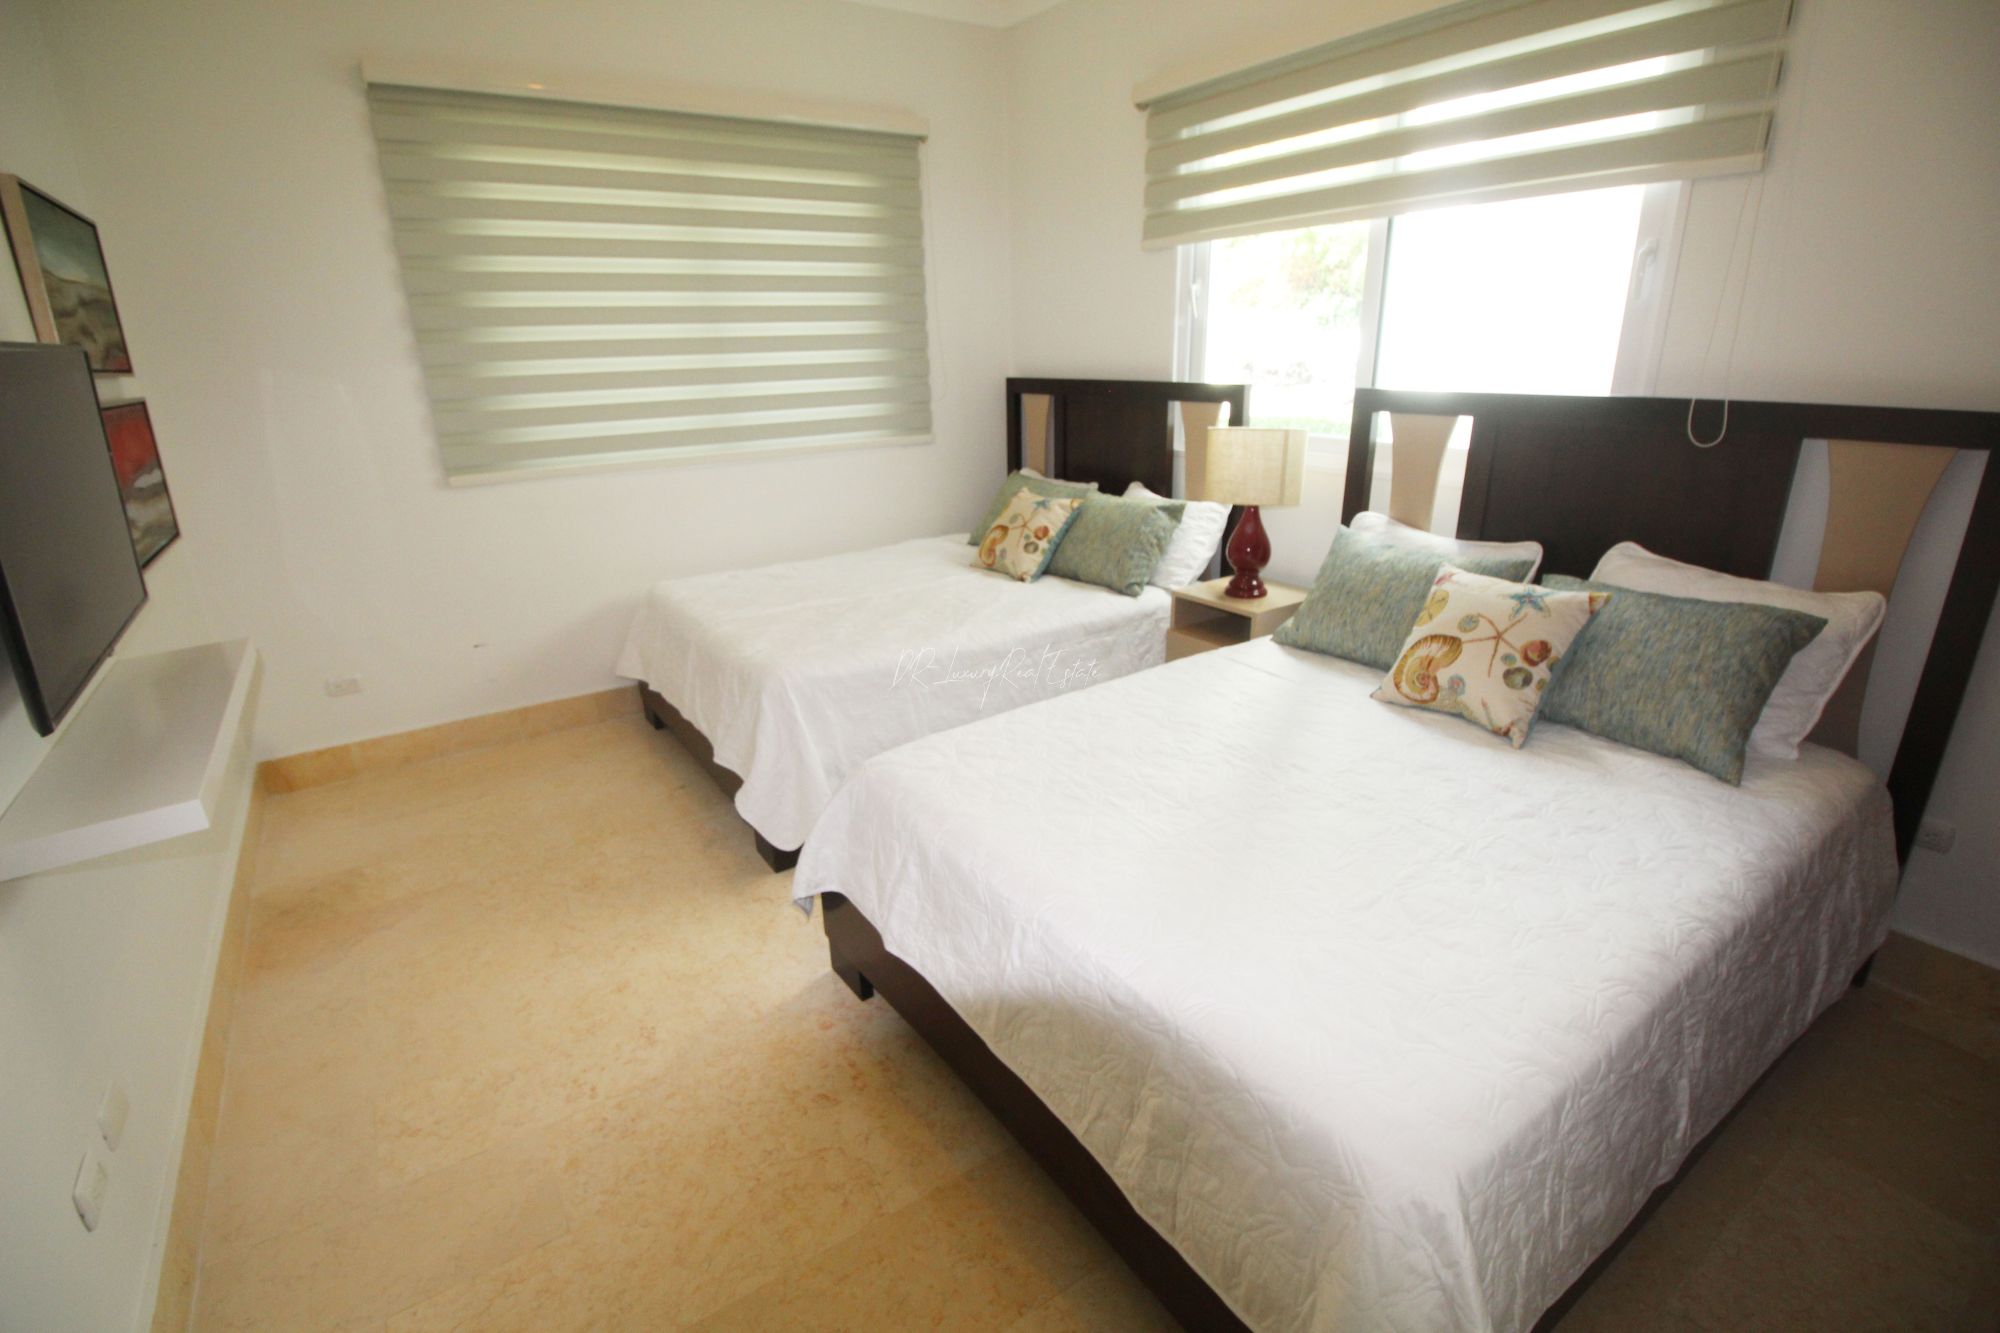 #11 Beautiful modern beachfront condo with 3 bedrooms